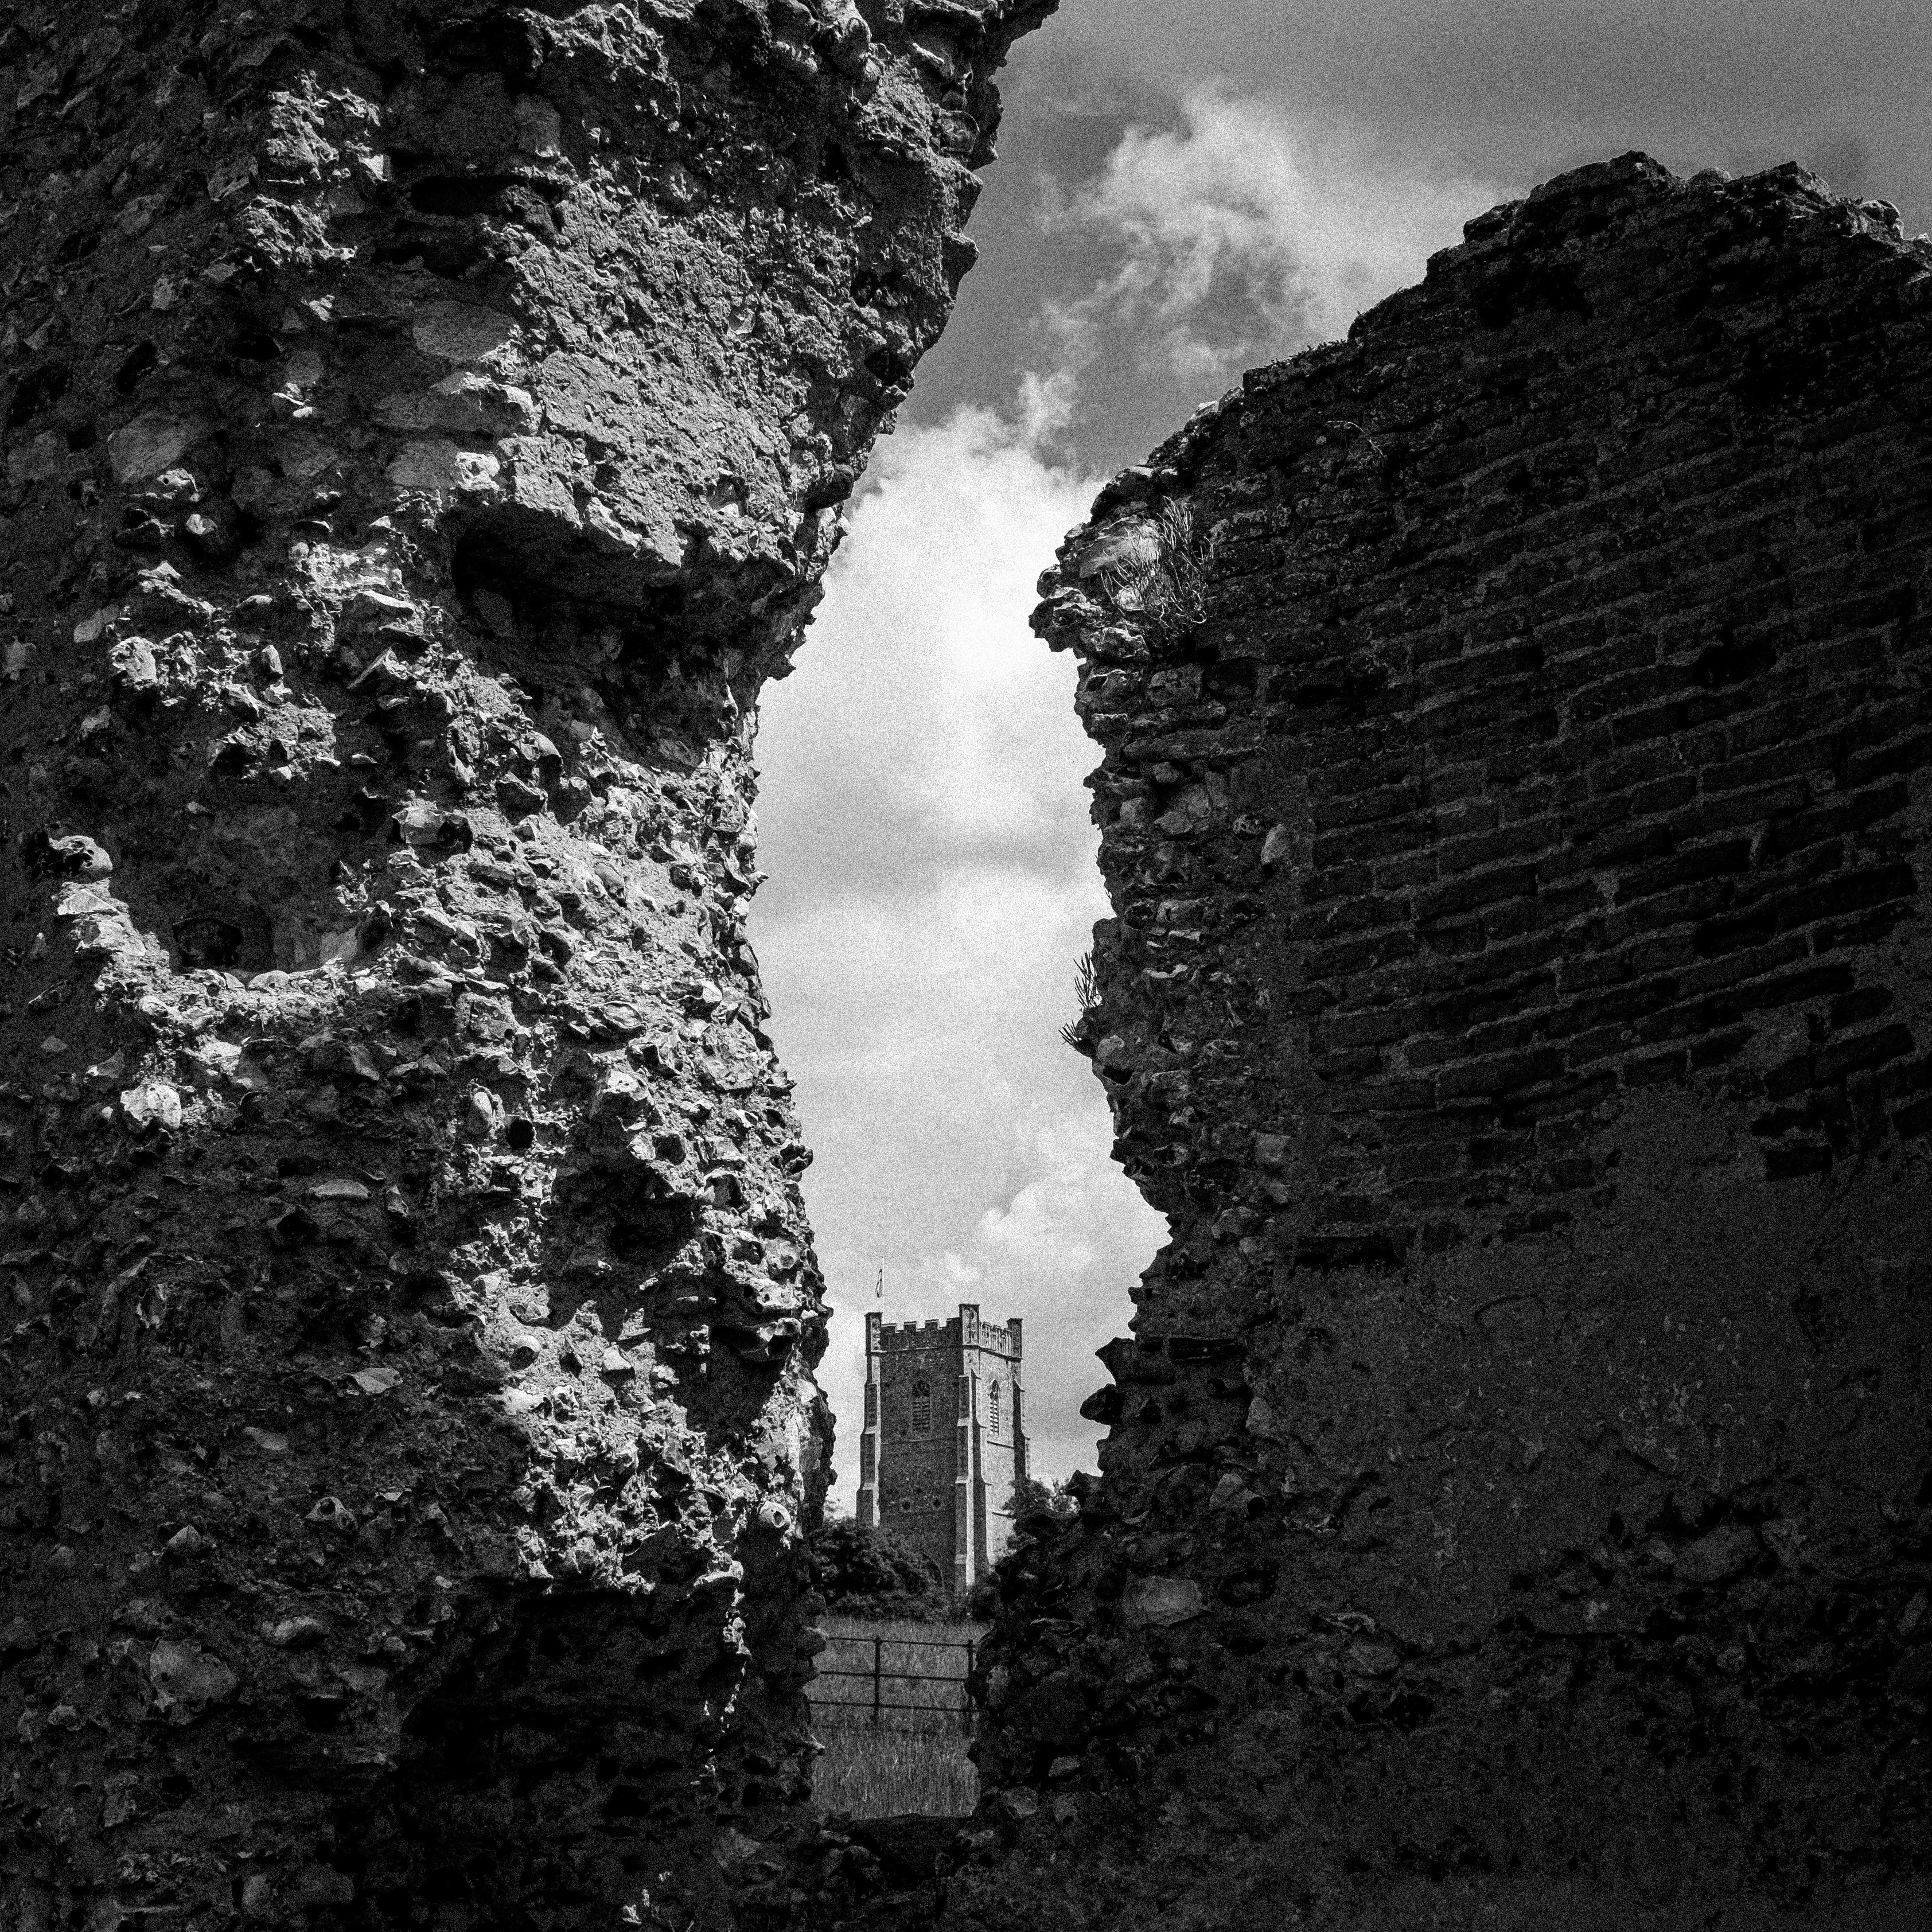 The old and the new. A private tour of Castle Acre Priory in honour of my birthday and old queeny's platinum jubilee.